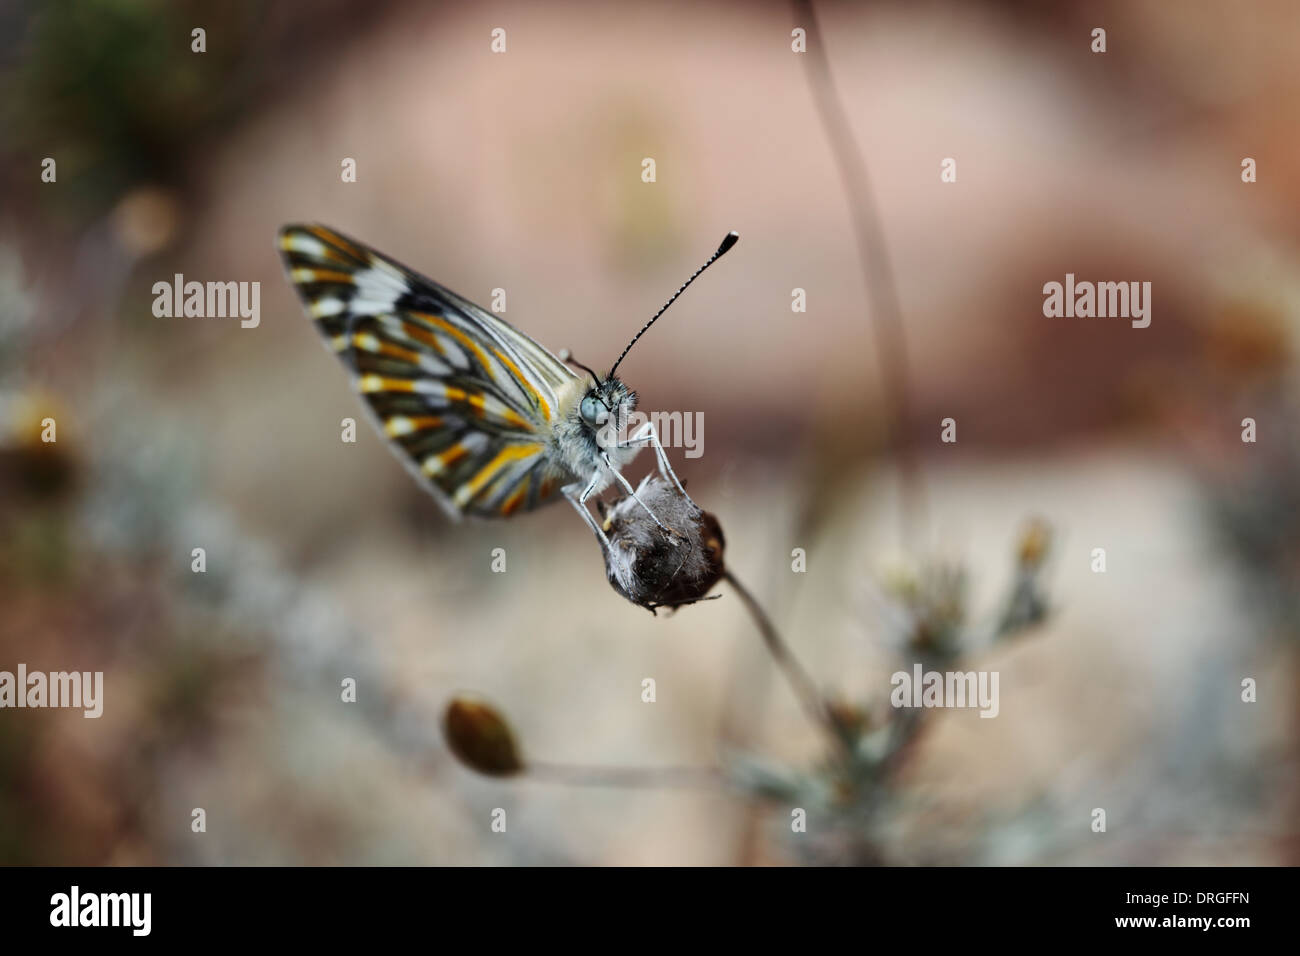 Macro image of a butterfly perched on a flower head in Montagu, Western Cape Province, South Africa Stock Photo